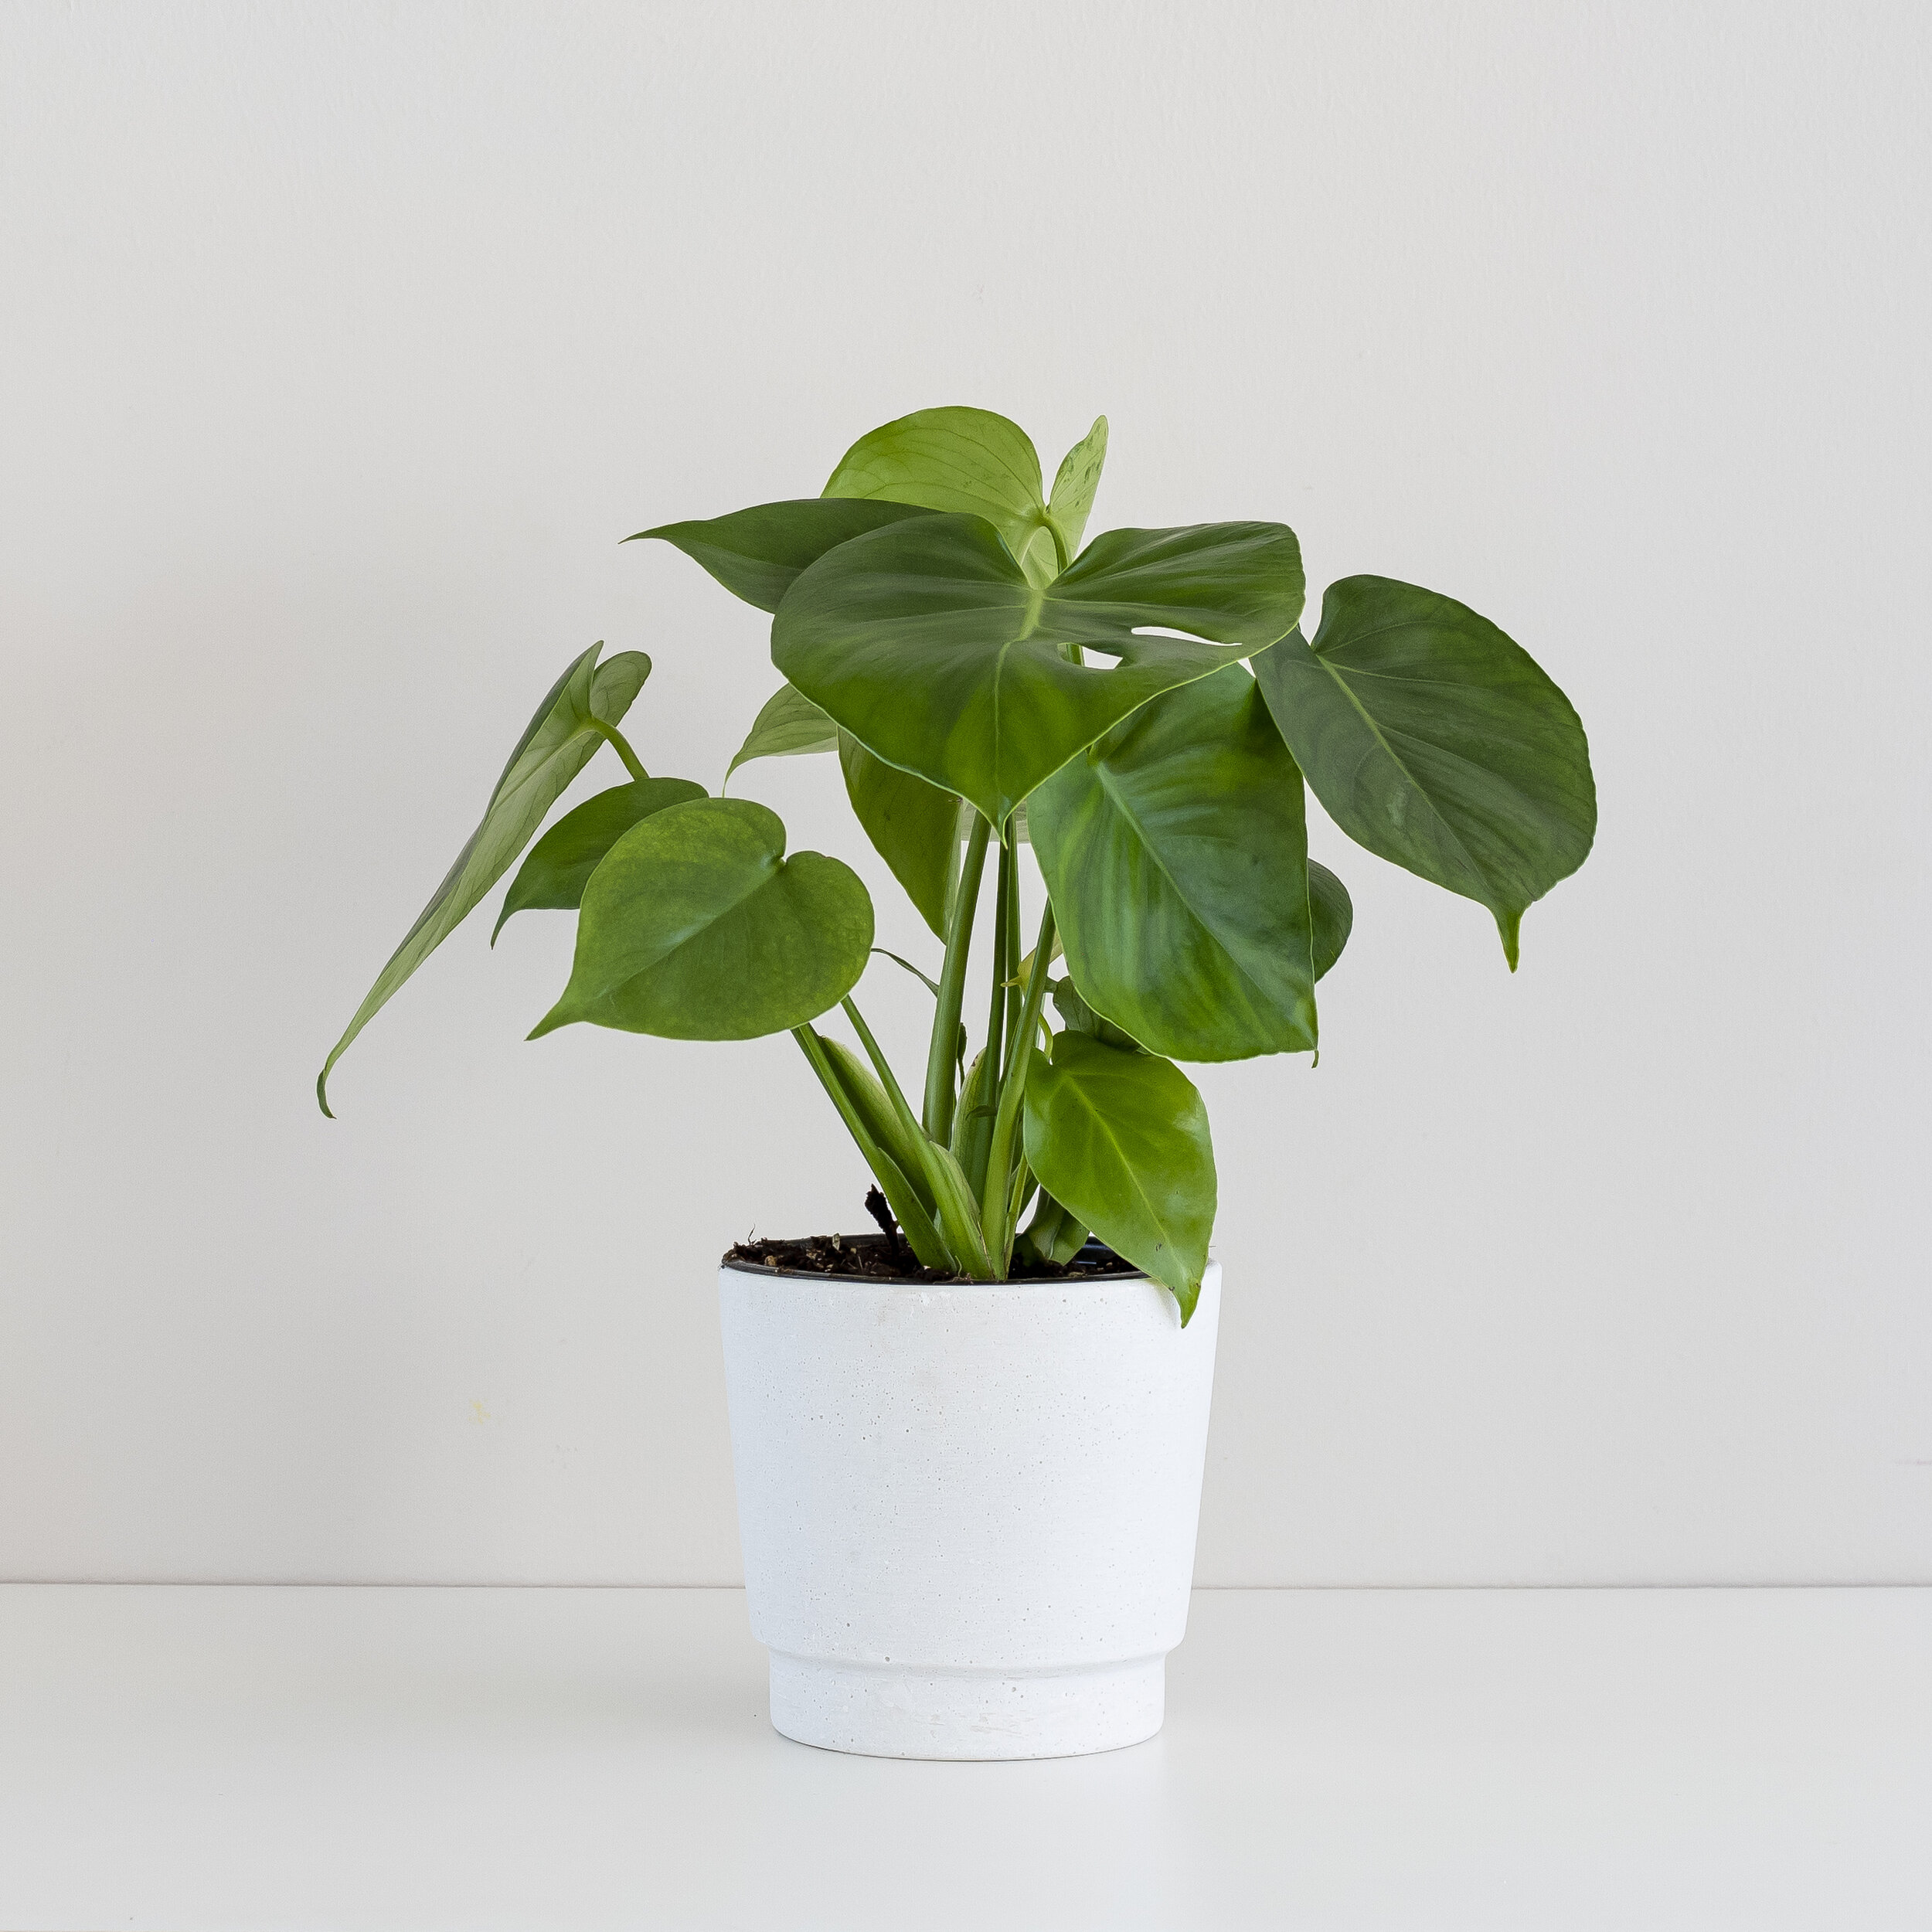 A green Monstera Deliciosa plant in a white pot siting in front of a beige background